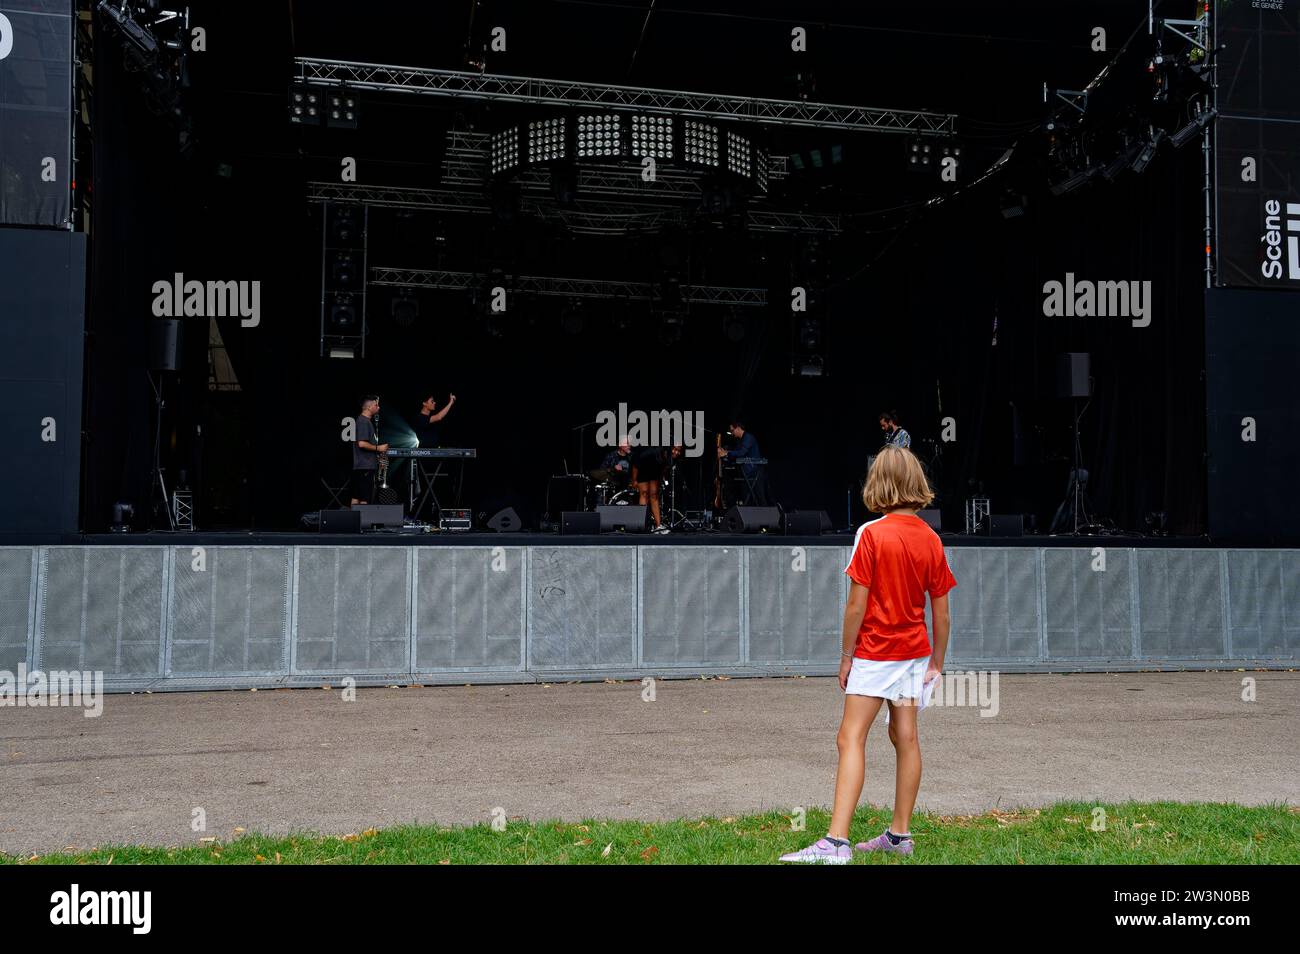 Captivating moment: a blonde, young girl in awe, gazing intently at Evita Koné and her band during their soundcheck, Ella Fitzgerald stage. Stock Photo